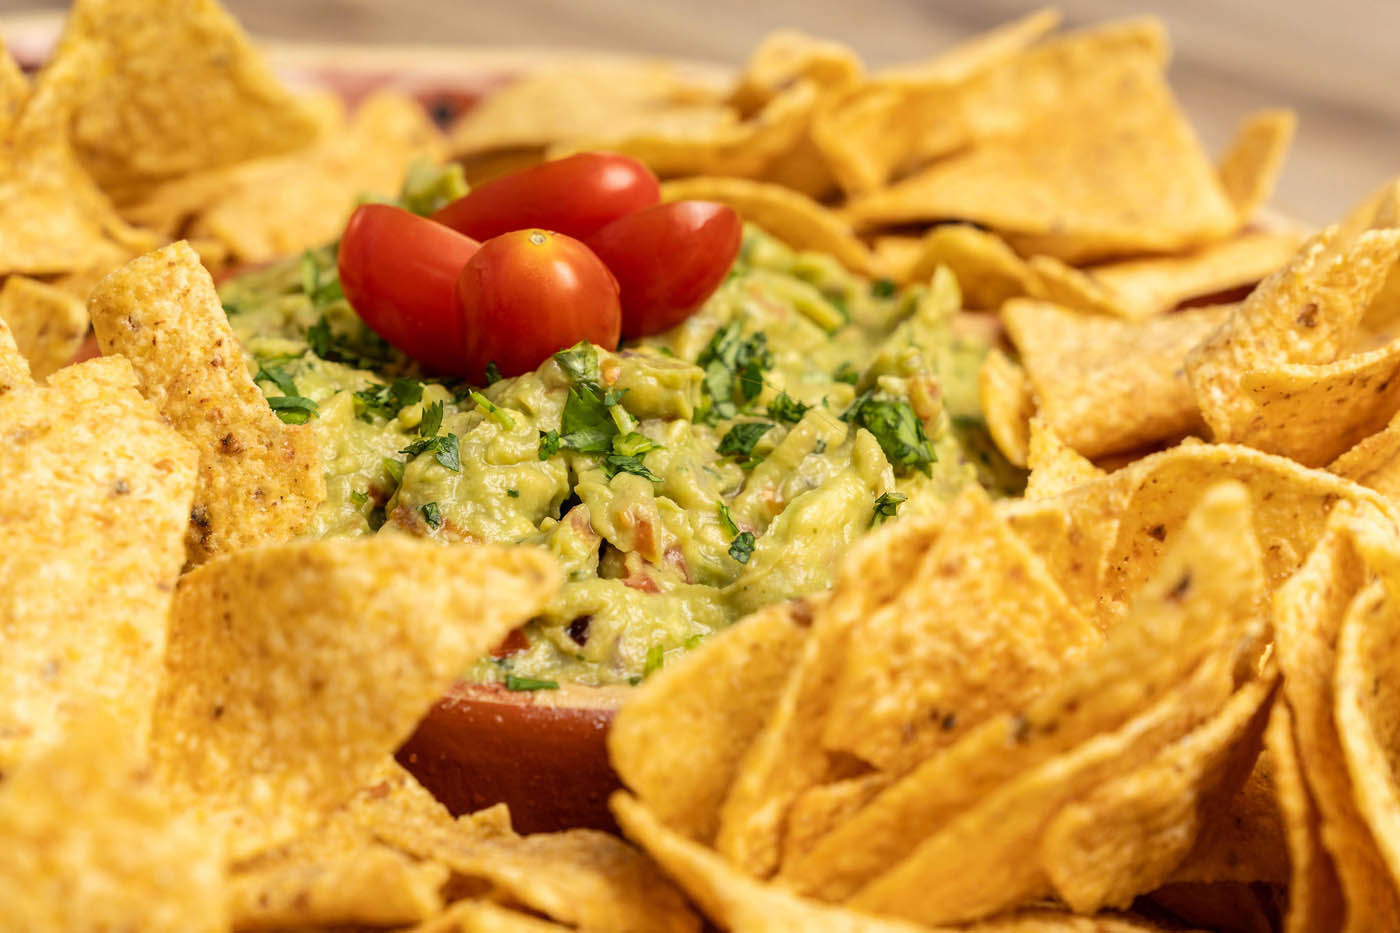 Guacamole dip with tortilla chips at The Real Food Academy Miami.